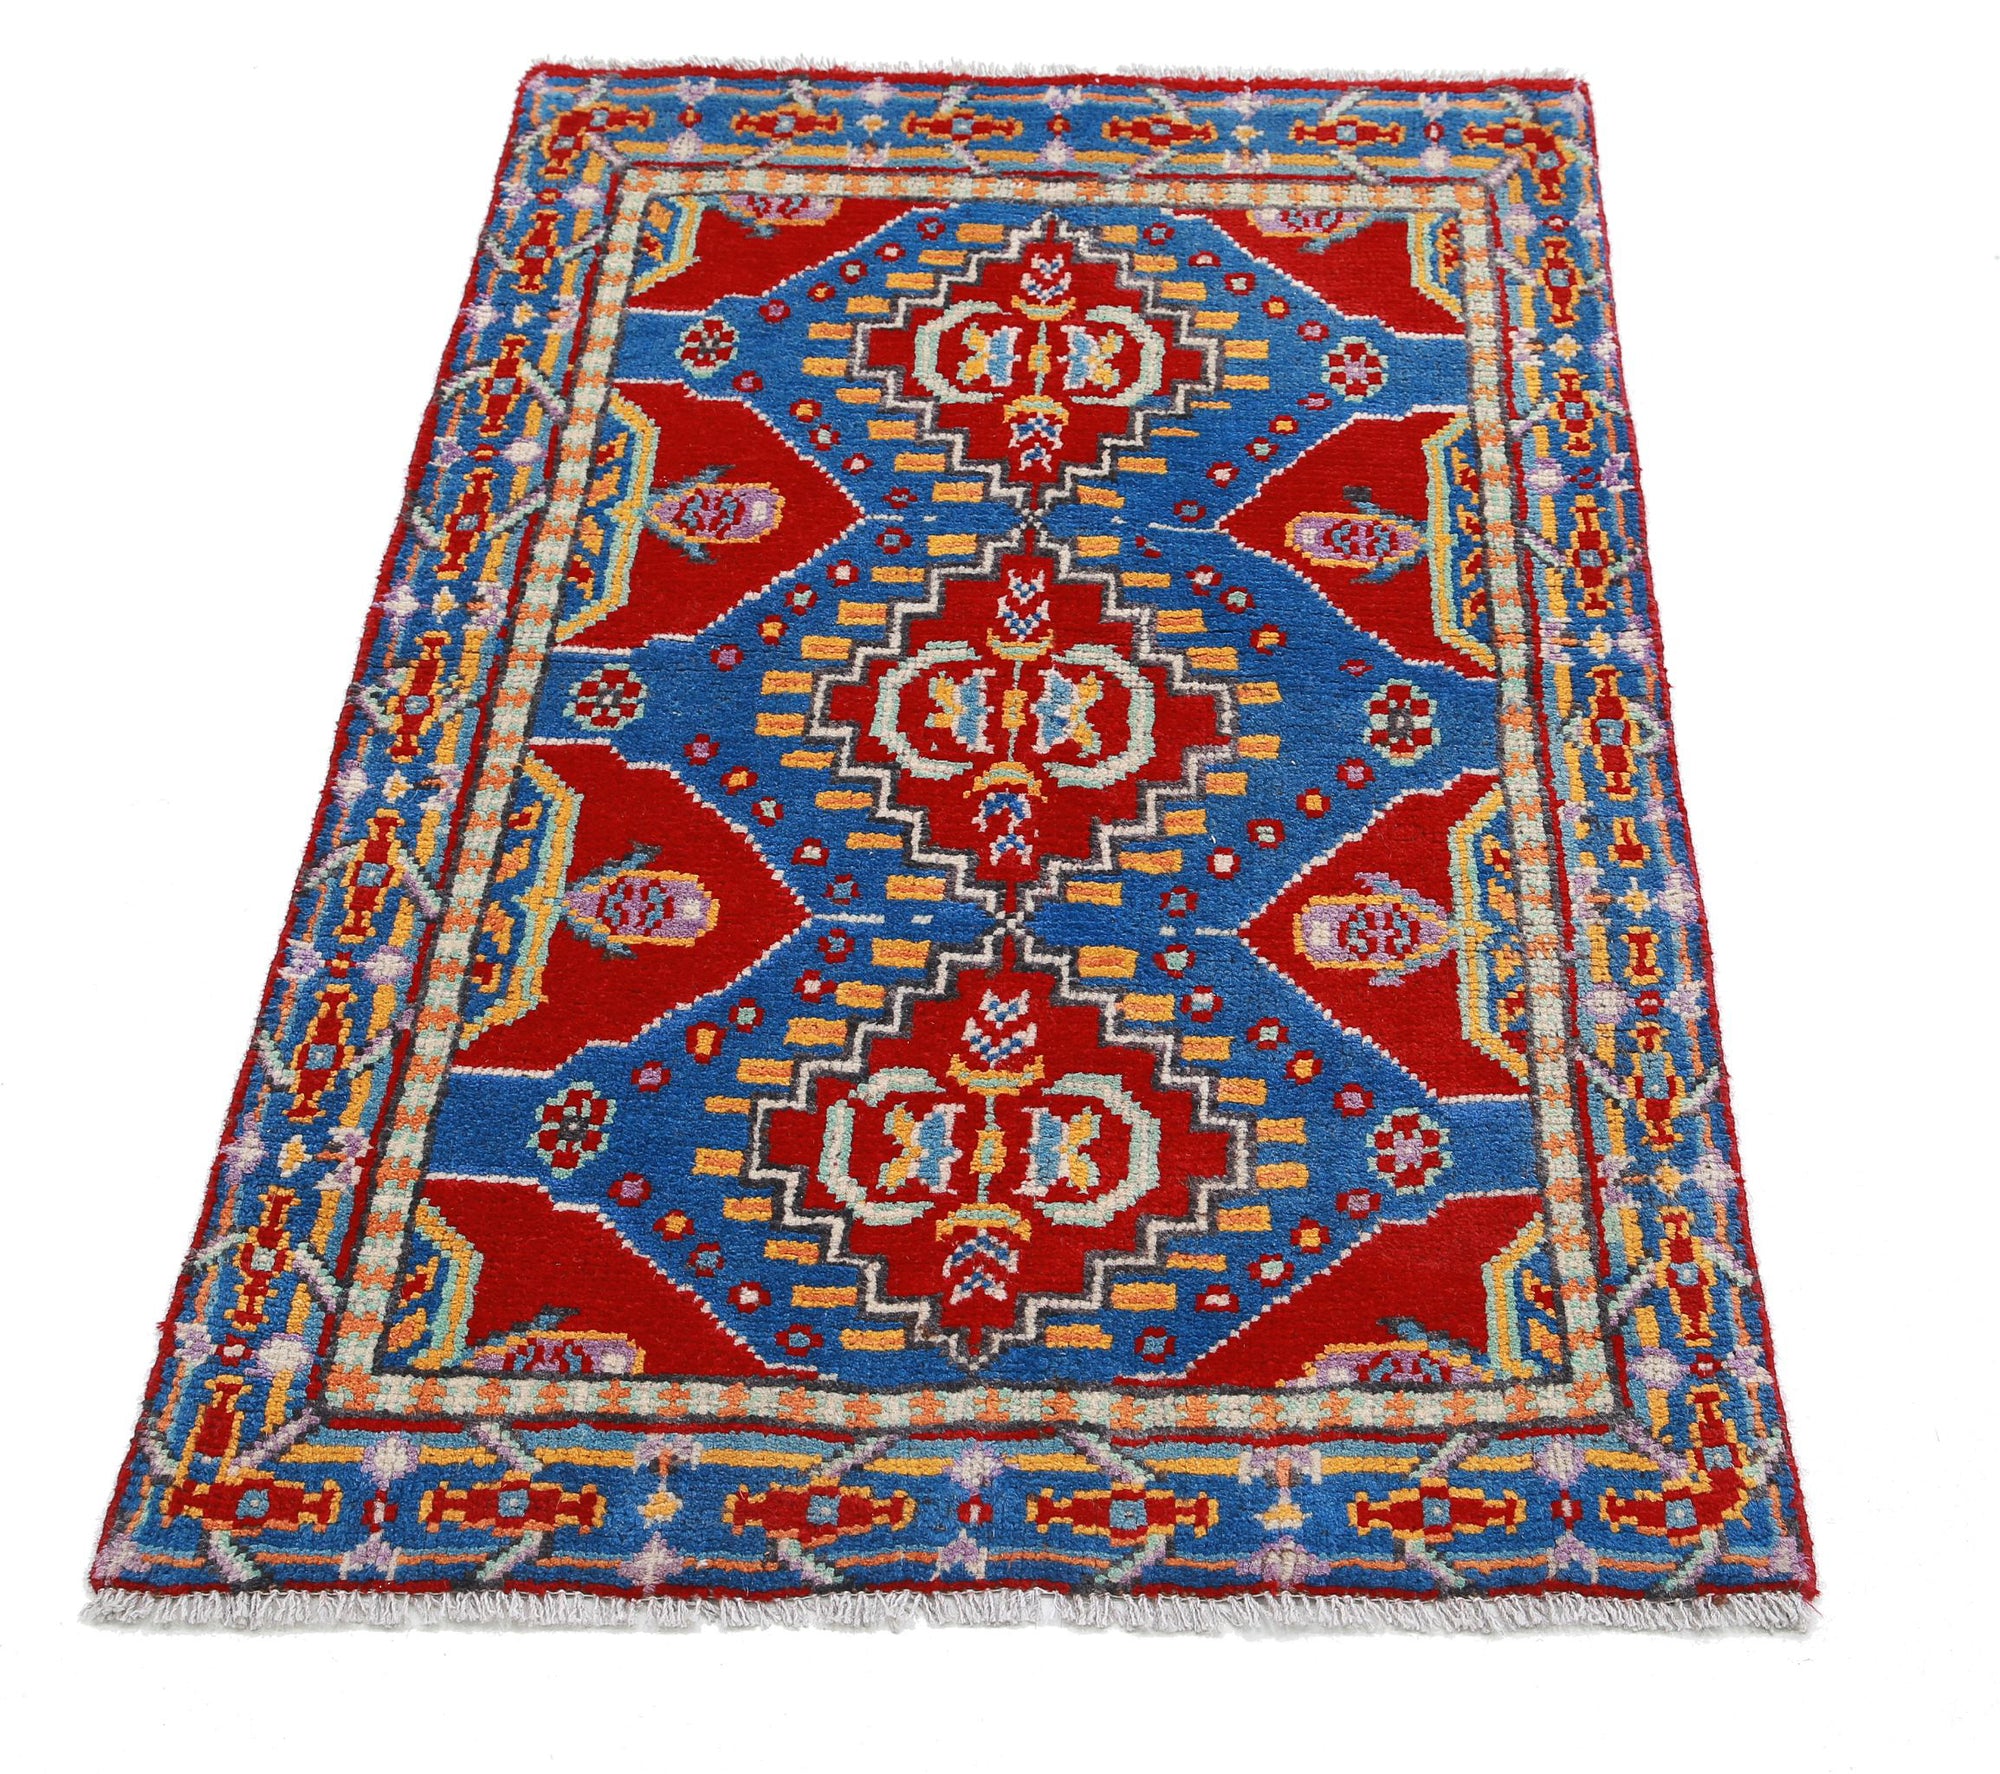 Revival-hand-knotted-qarghani-wool-rug-5014187-3.jpg